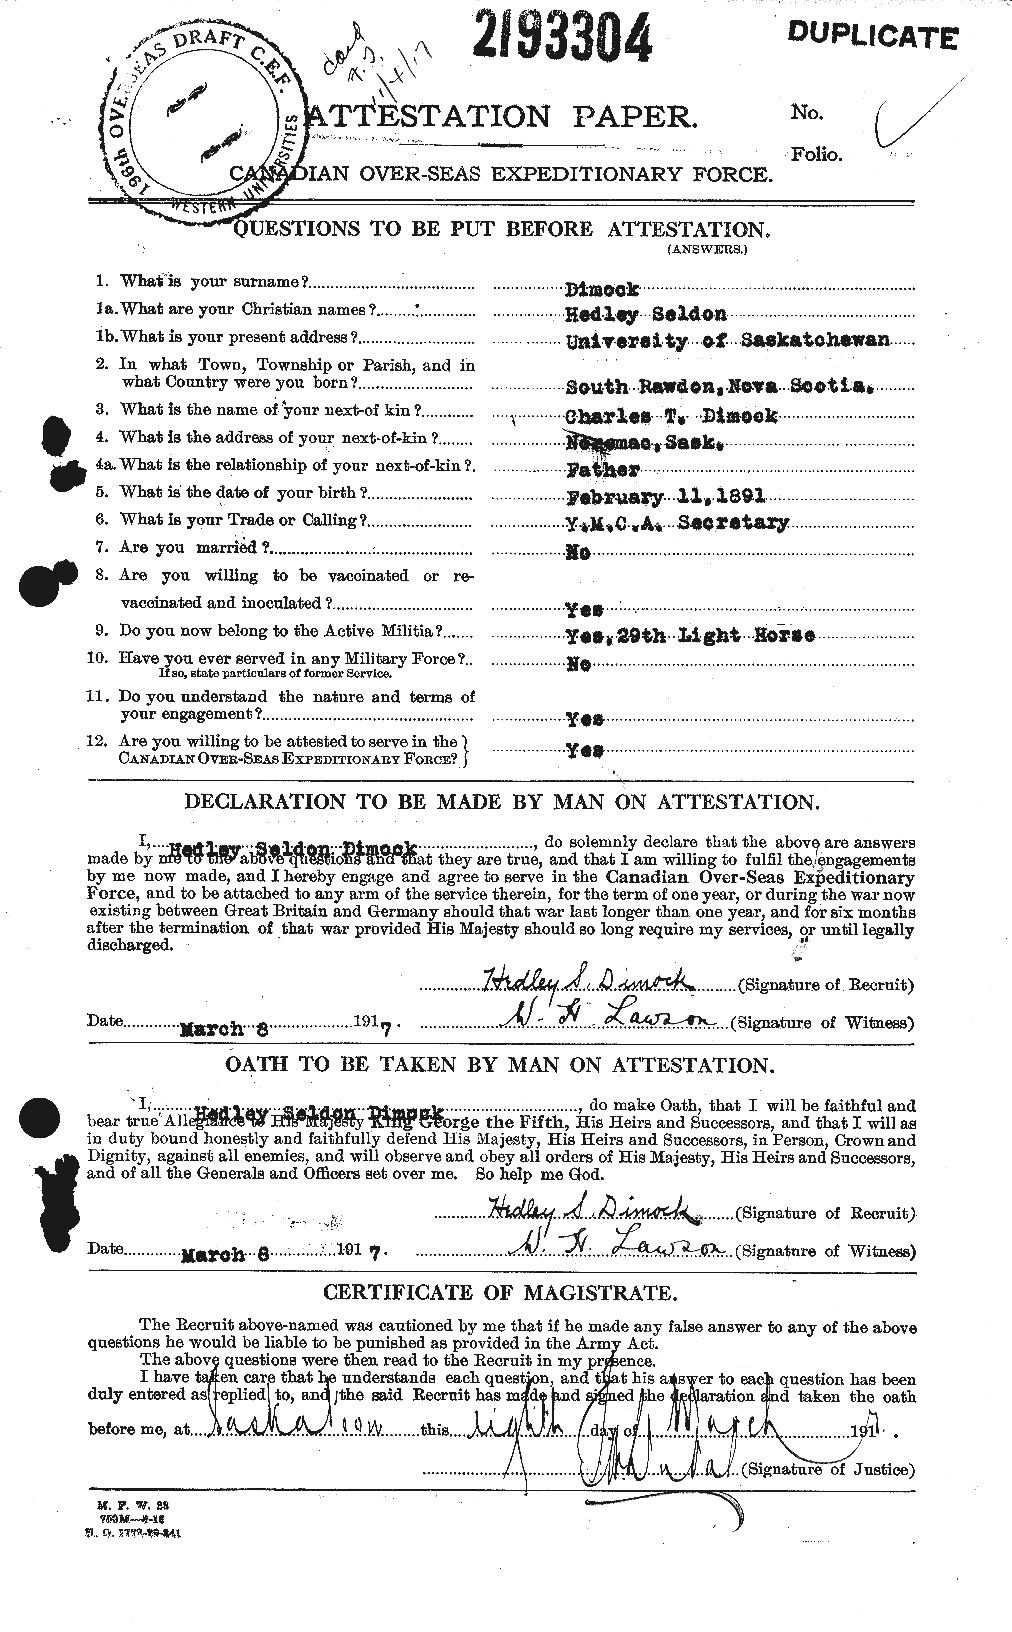 Personnel Records of the First World War - CEF 293849a